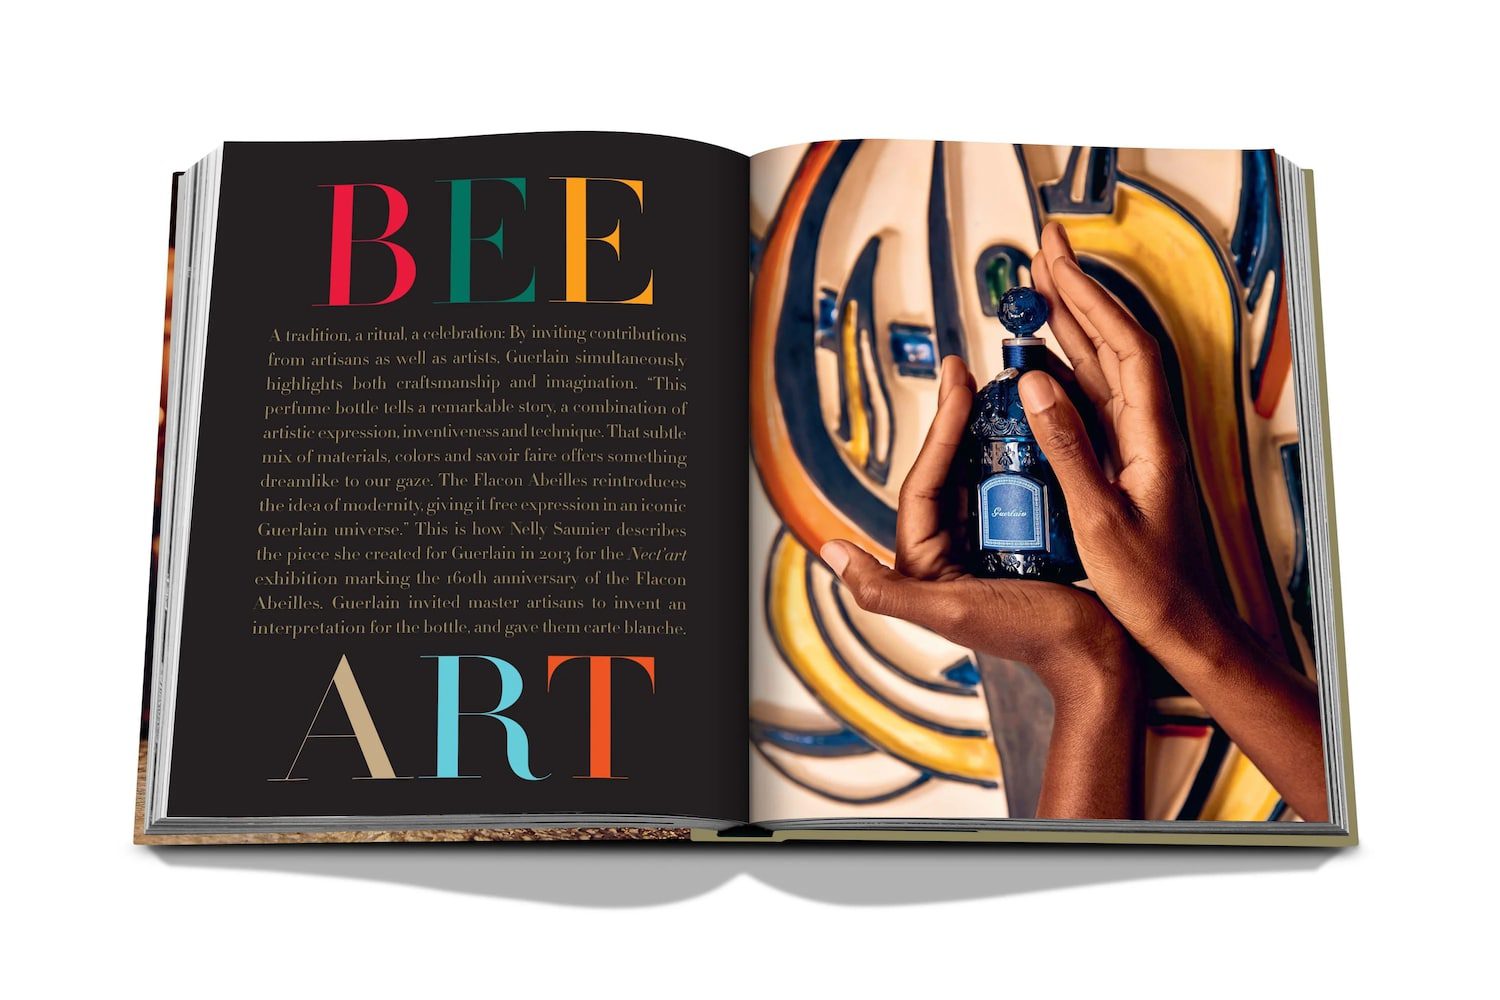 Assouline Guerlain: An Imperial Icon